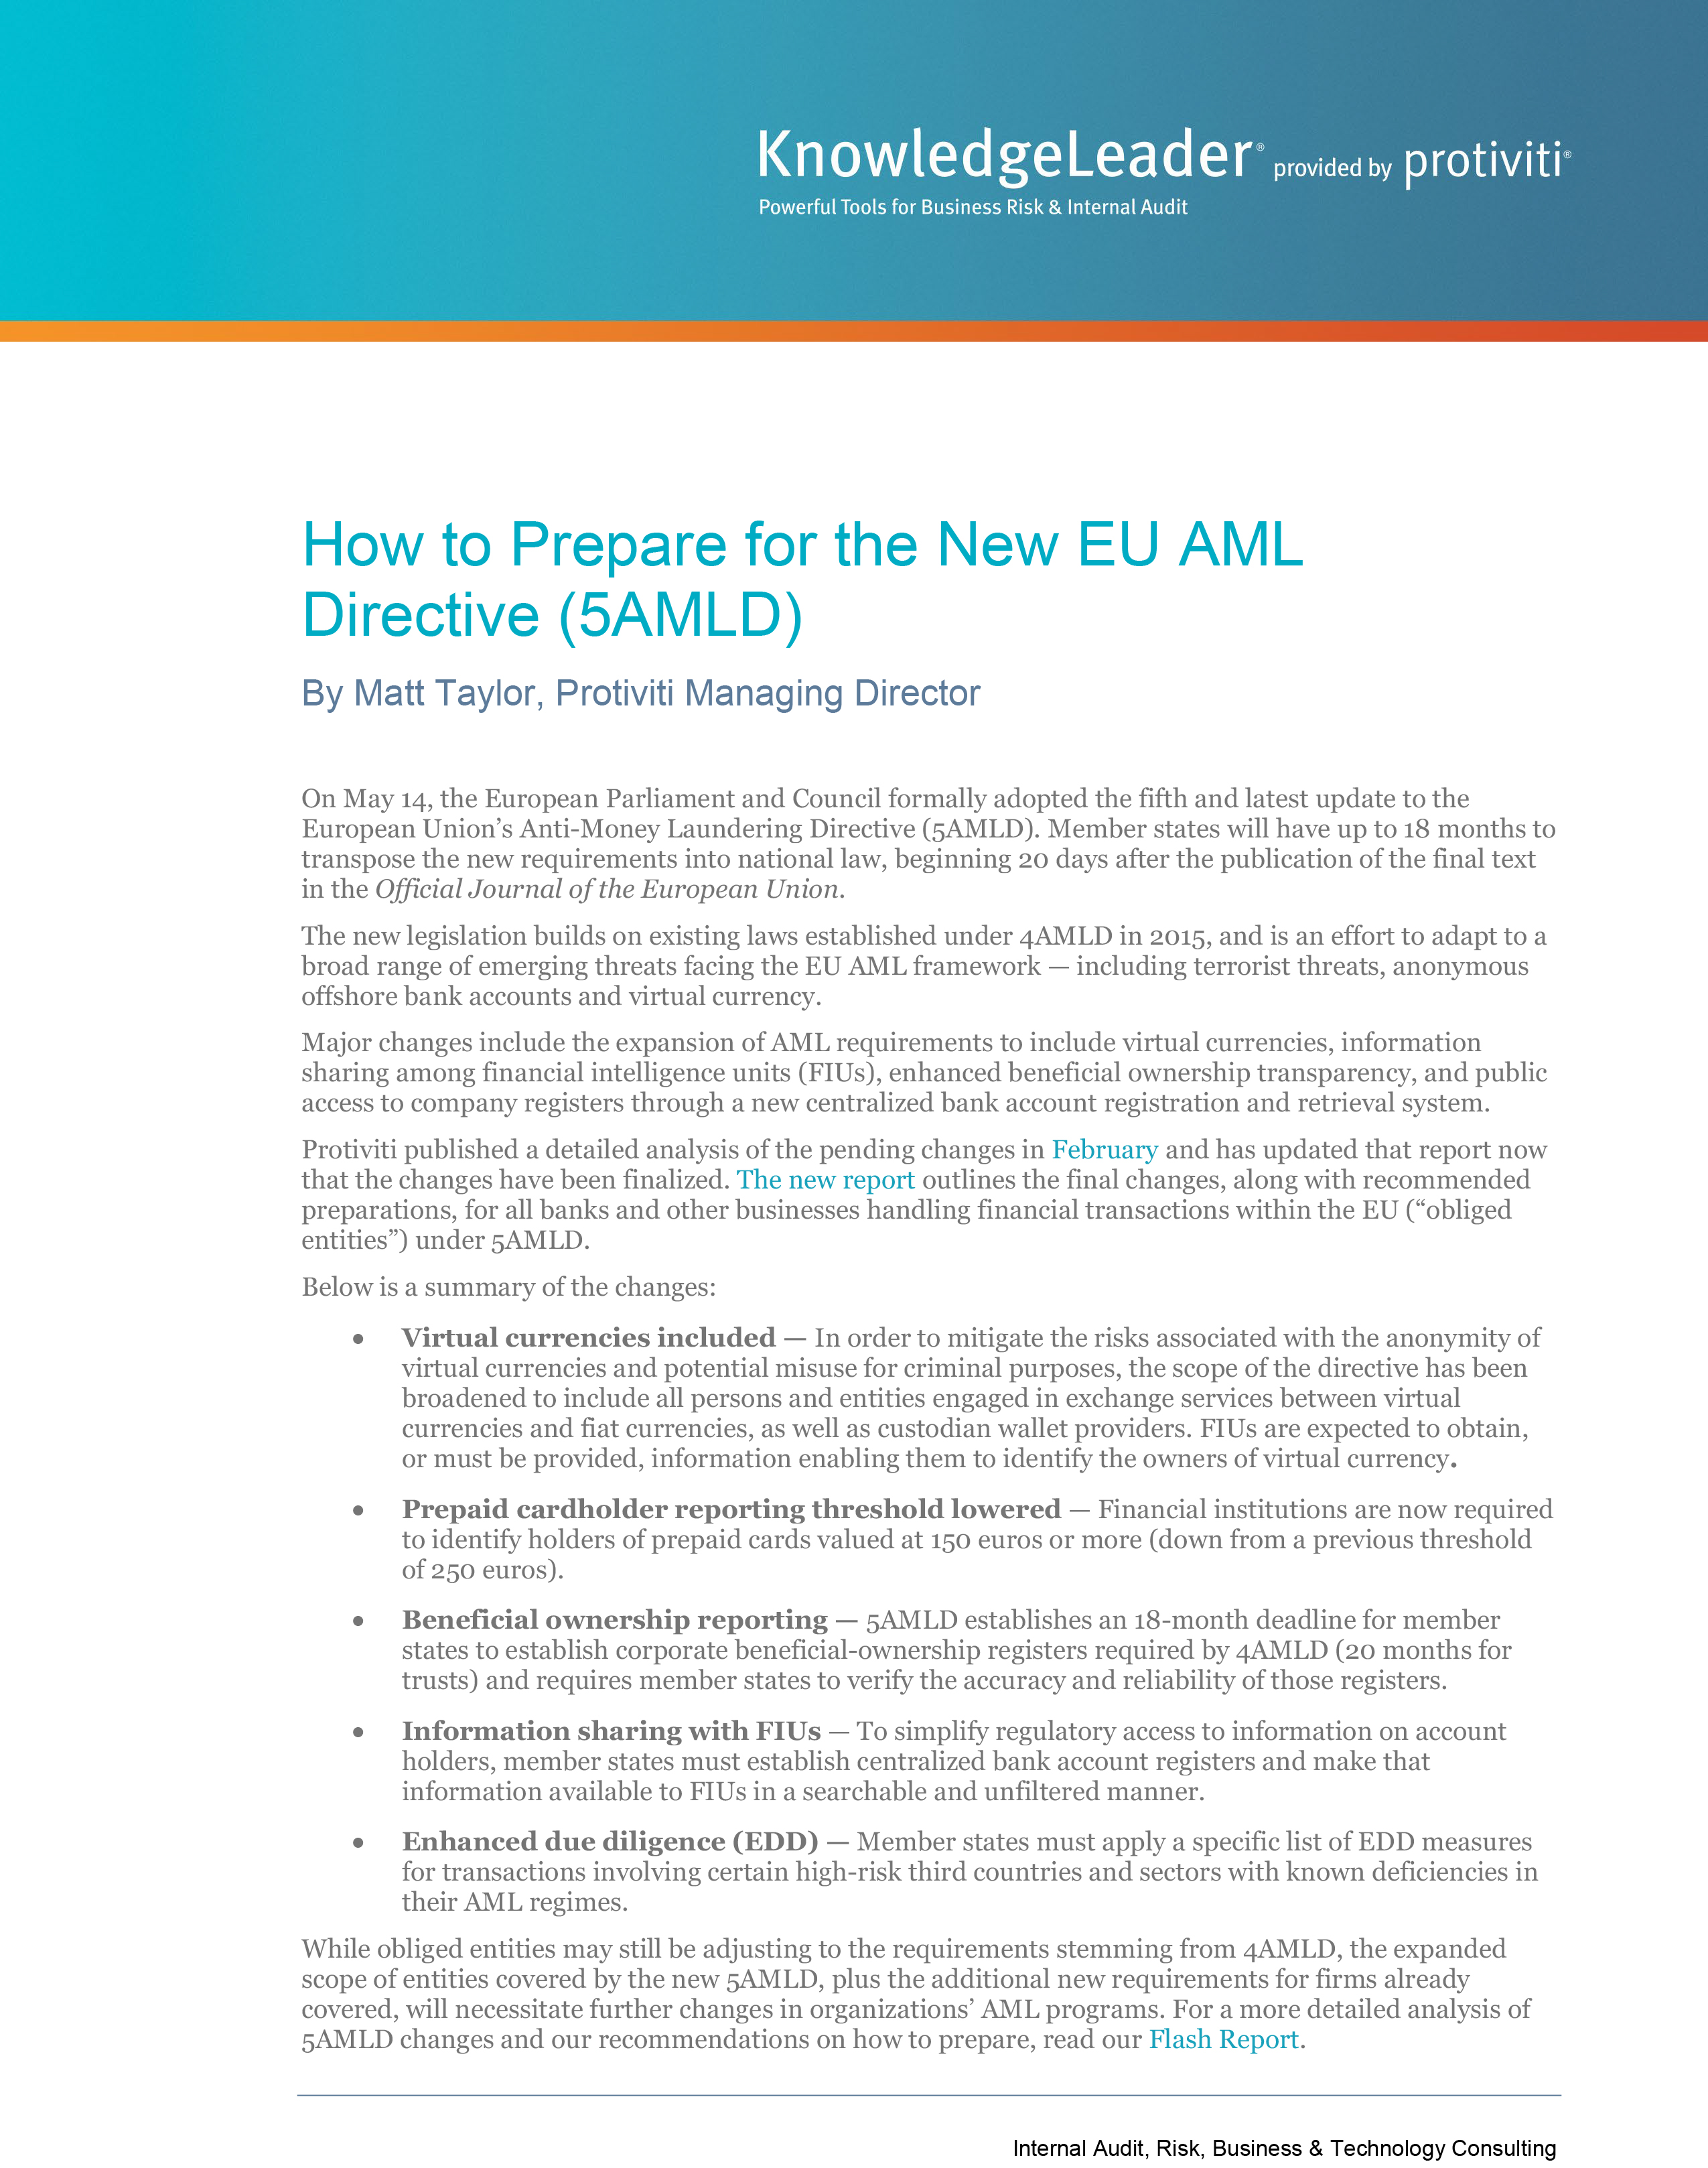 Screenshot of the first page of How to Prepare for the New EU AML Directive (5AMLD)